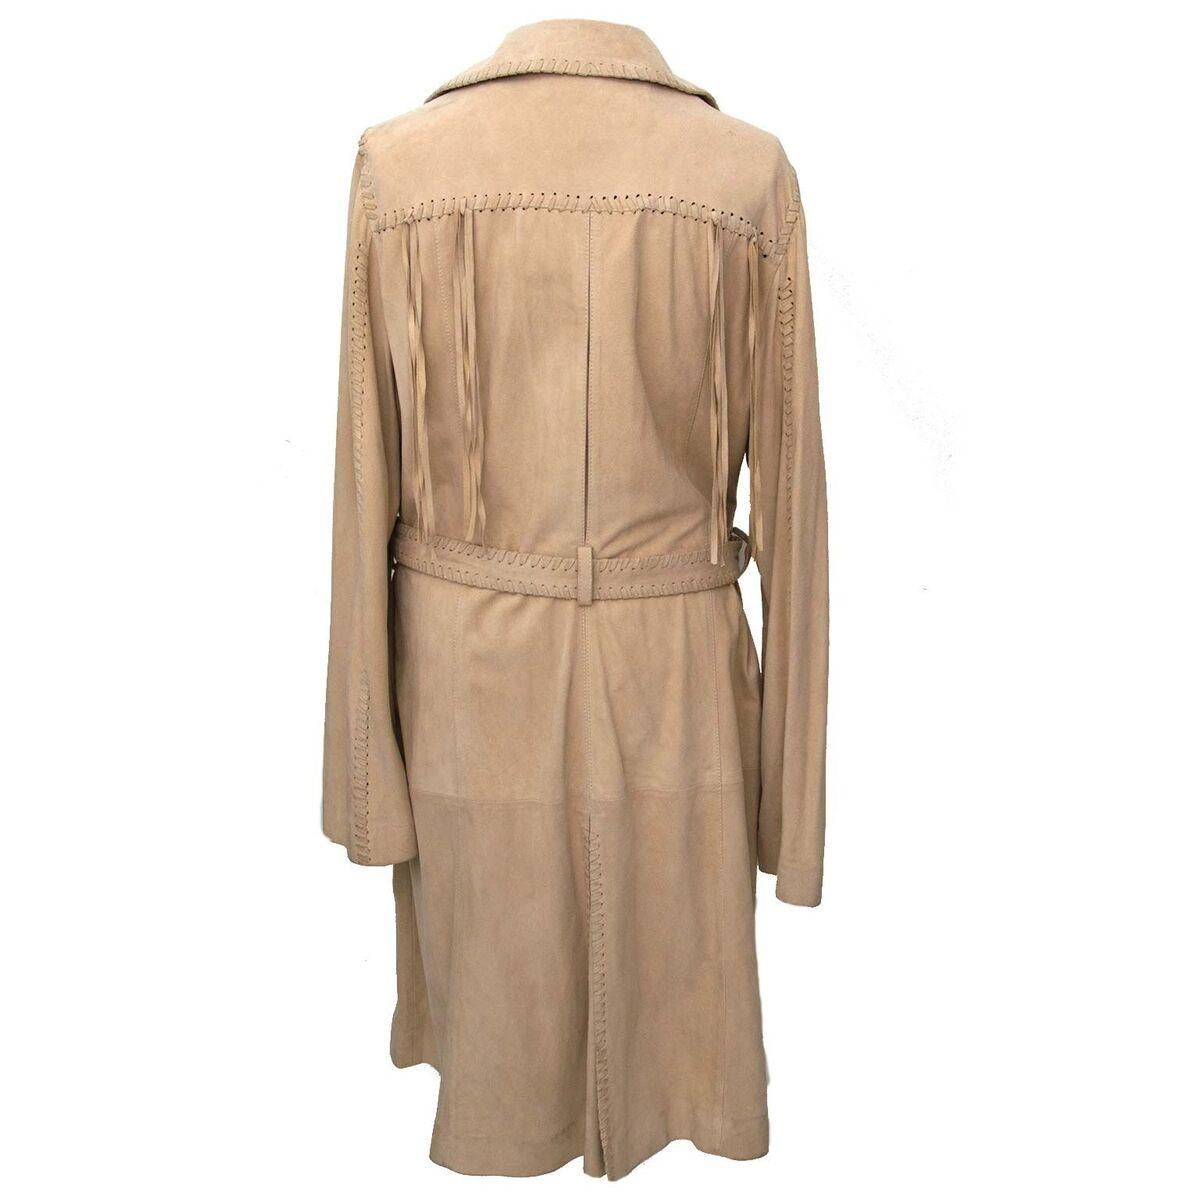 Good preloved condition

EST RET PRICE : € 2100

Roberto Cavalli Beige Fringes Trenchcoat

Achieve the perfect boho-chic look with this Roberto Cavalli fringes trenchcoat.

Its fringes will give your look a playful twist.

The trenchcoat has two big